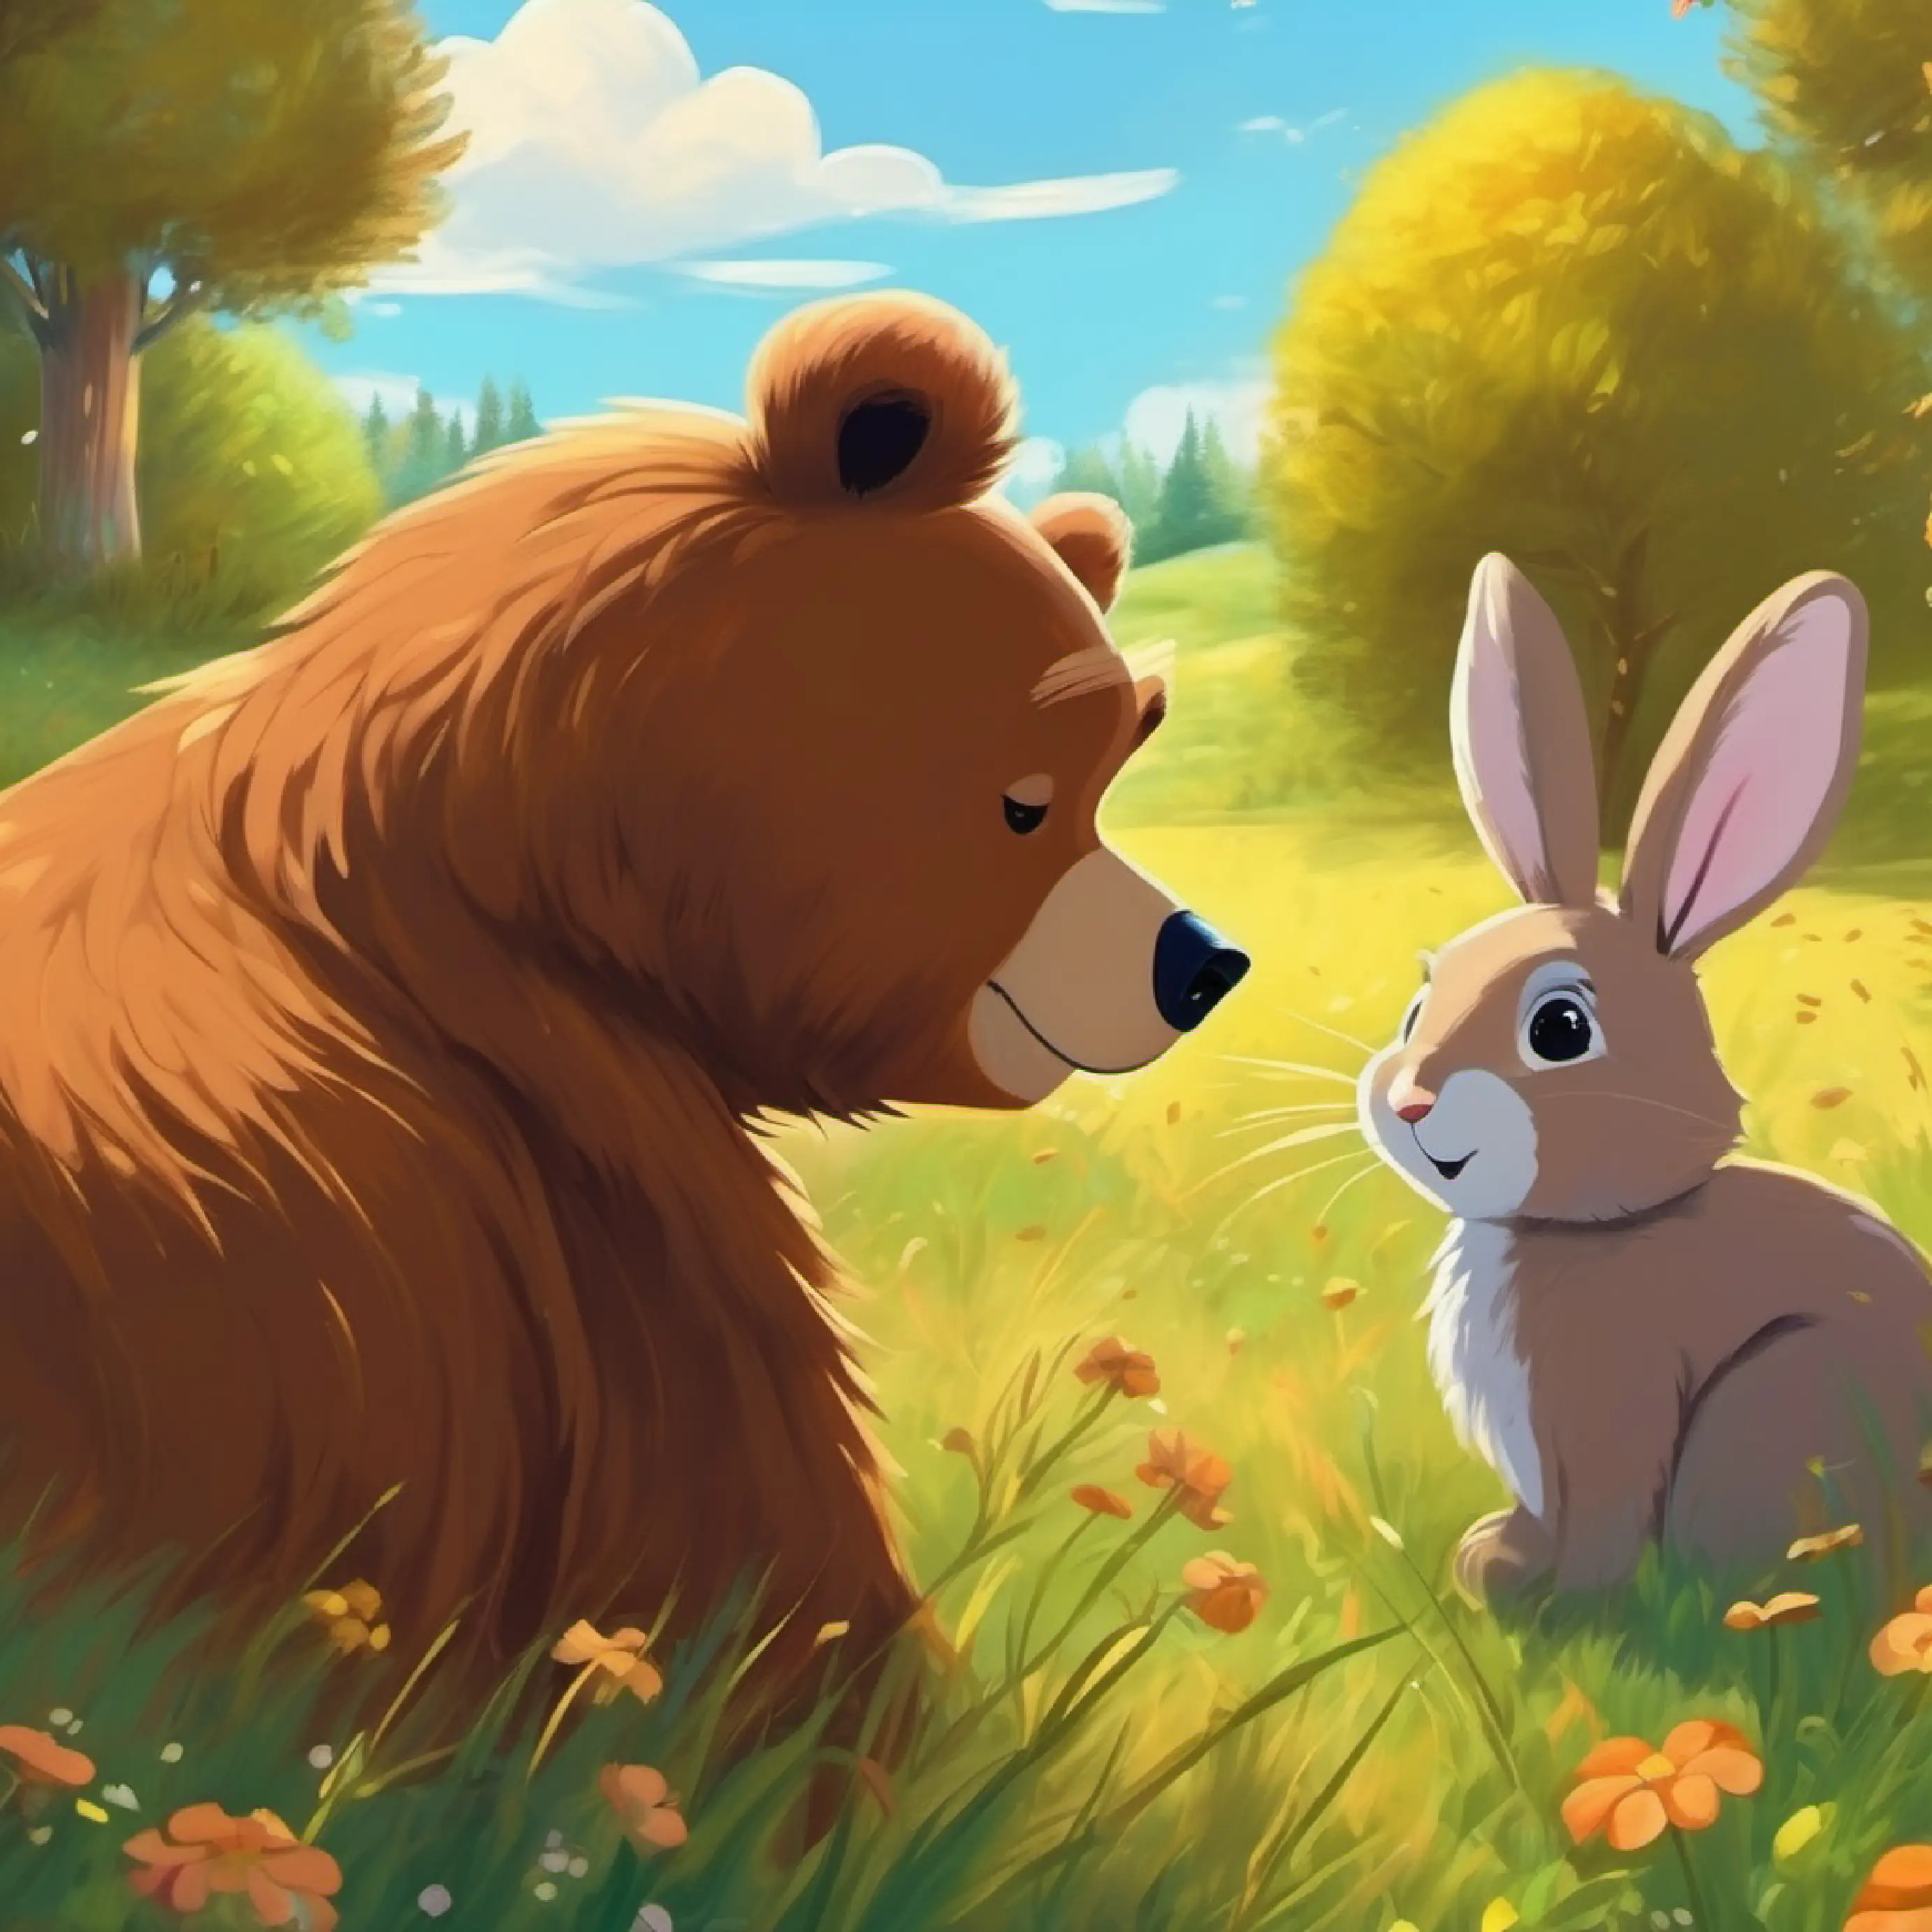 Introduces A brown bear closing its eyes talking to a brown rabbit in a meadow 